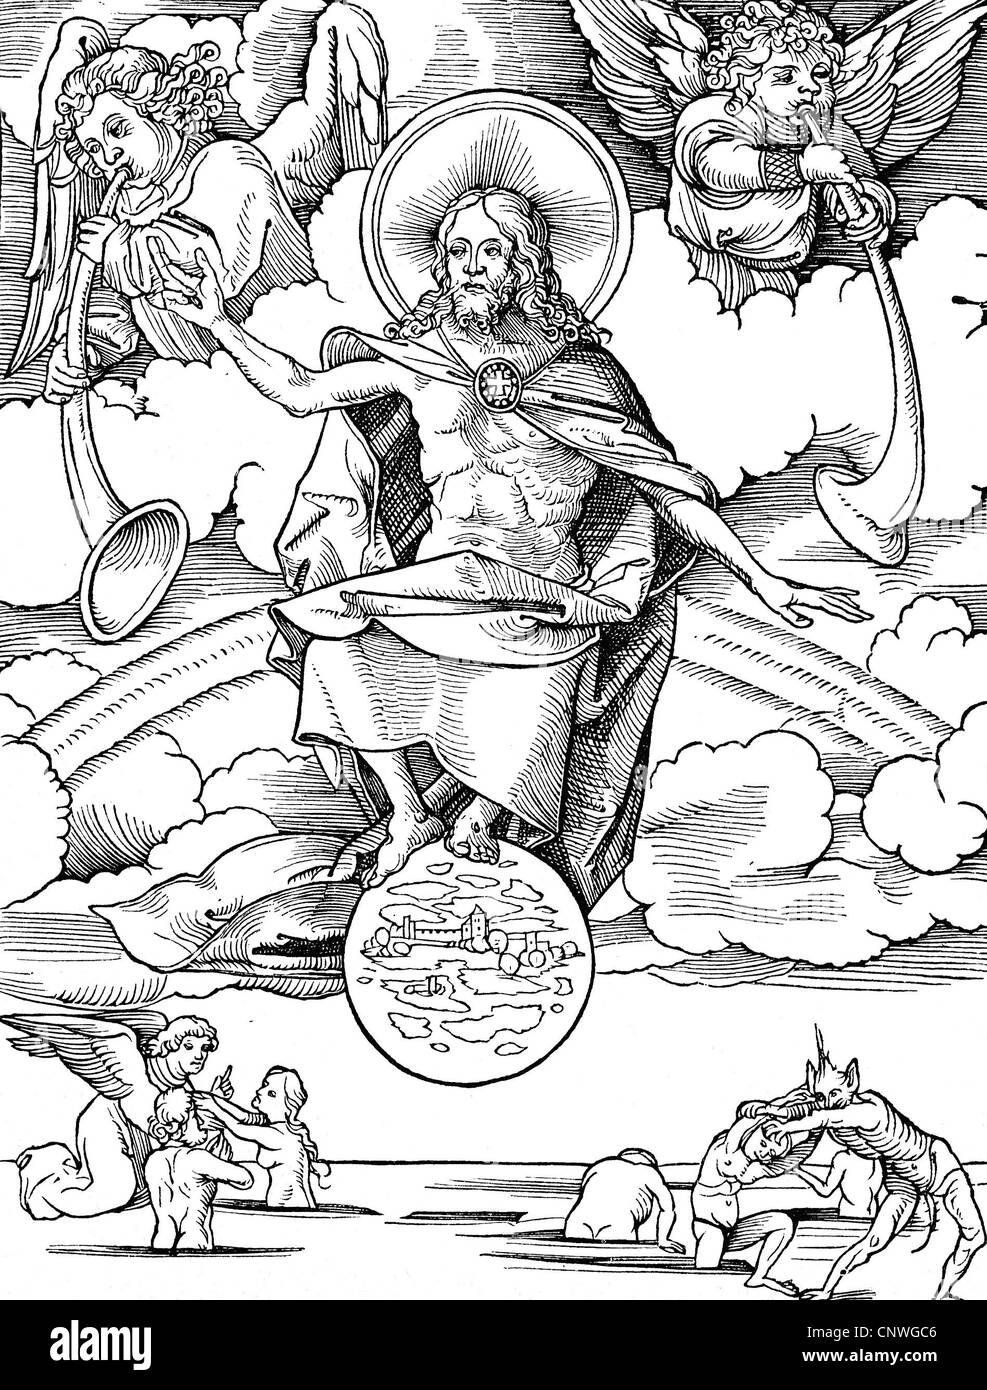 religion, apocalypse, 'Last Judgement', woodcut by Hans Wechtlin (1480/1485 - after 1526), Additional-Rights-Clearences-Not Available Stock Photo